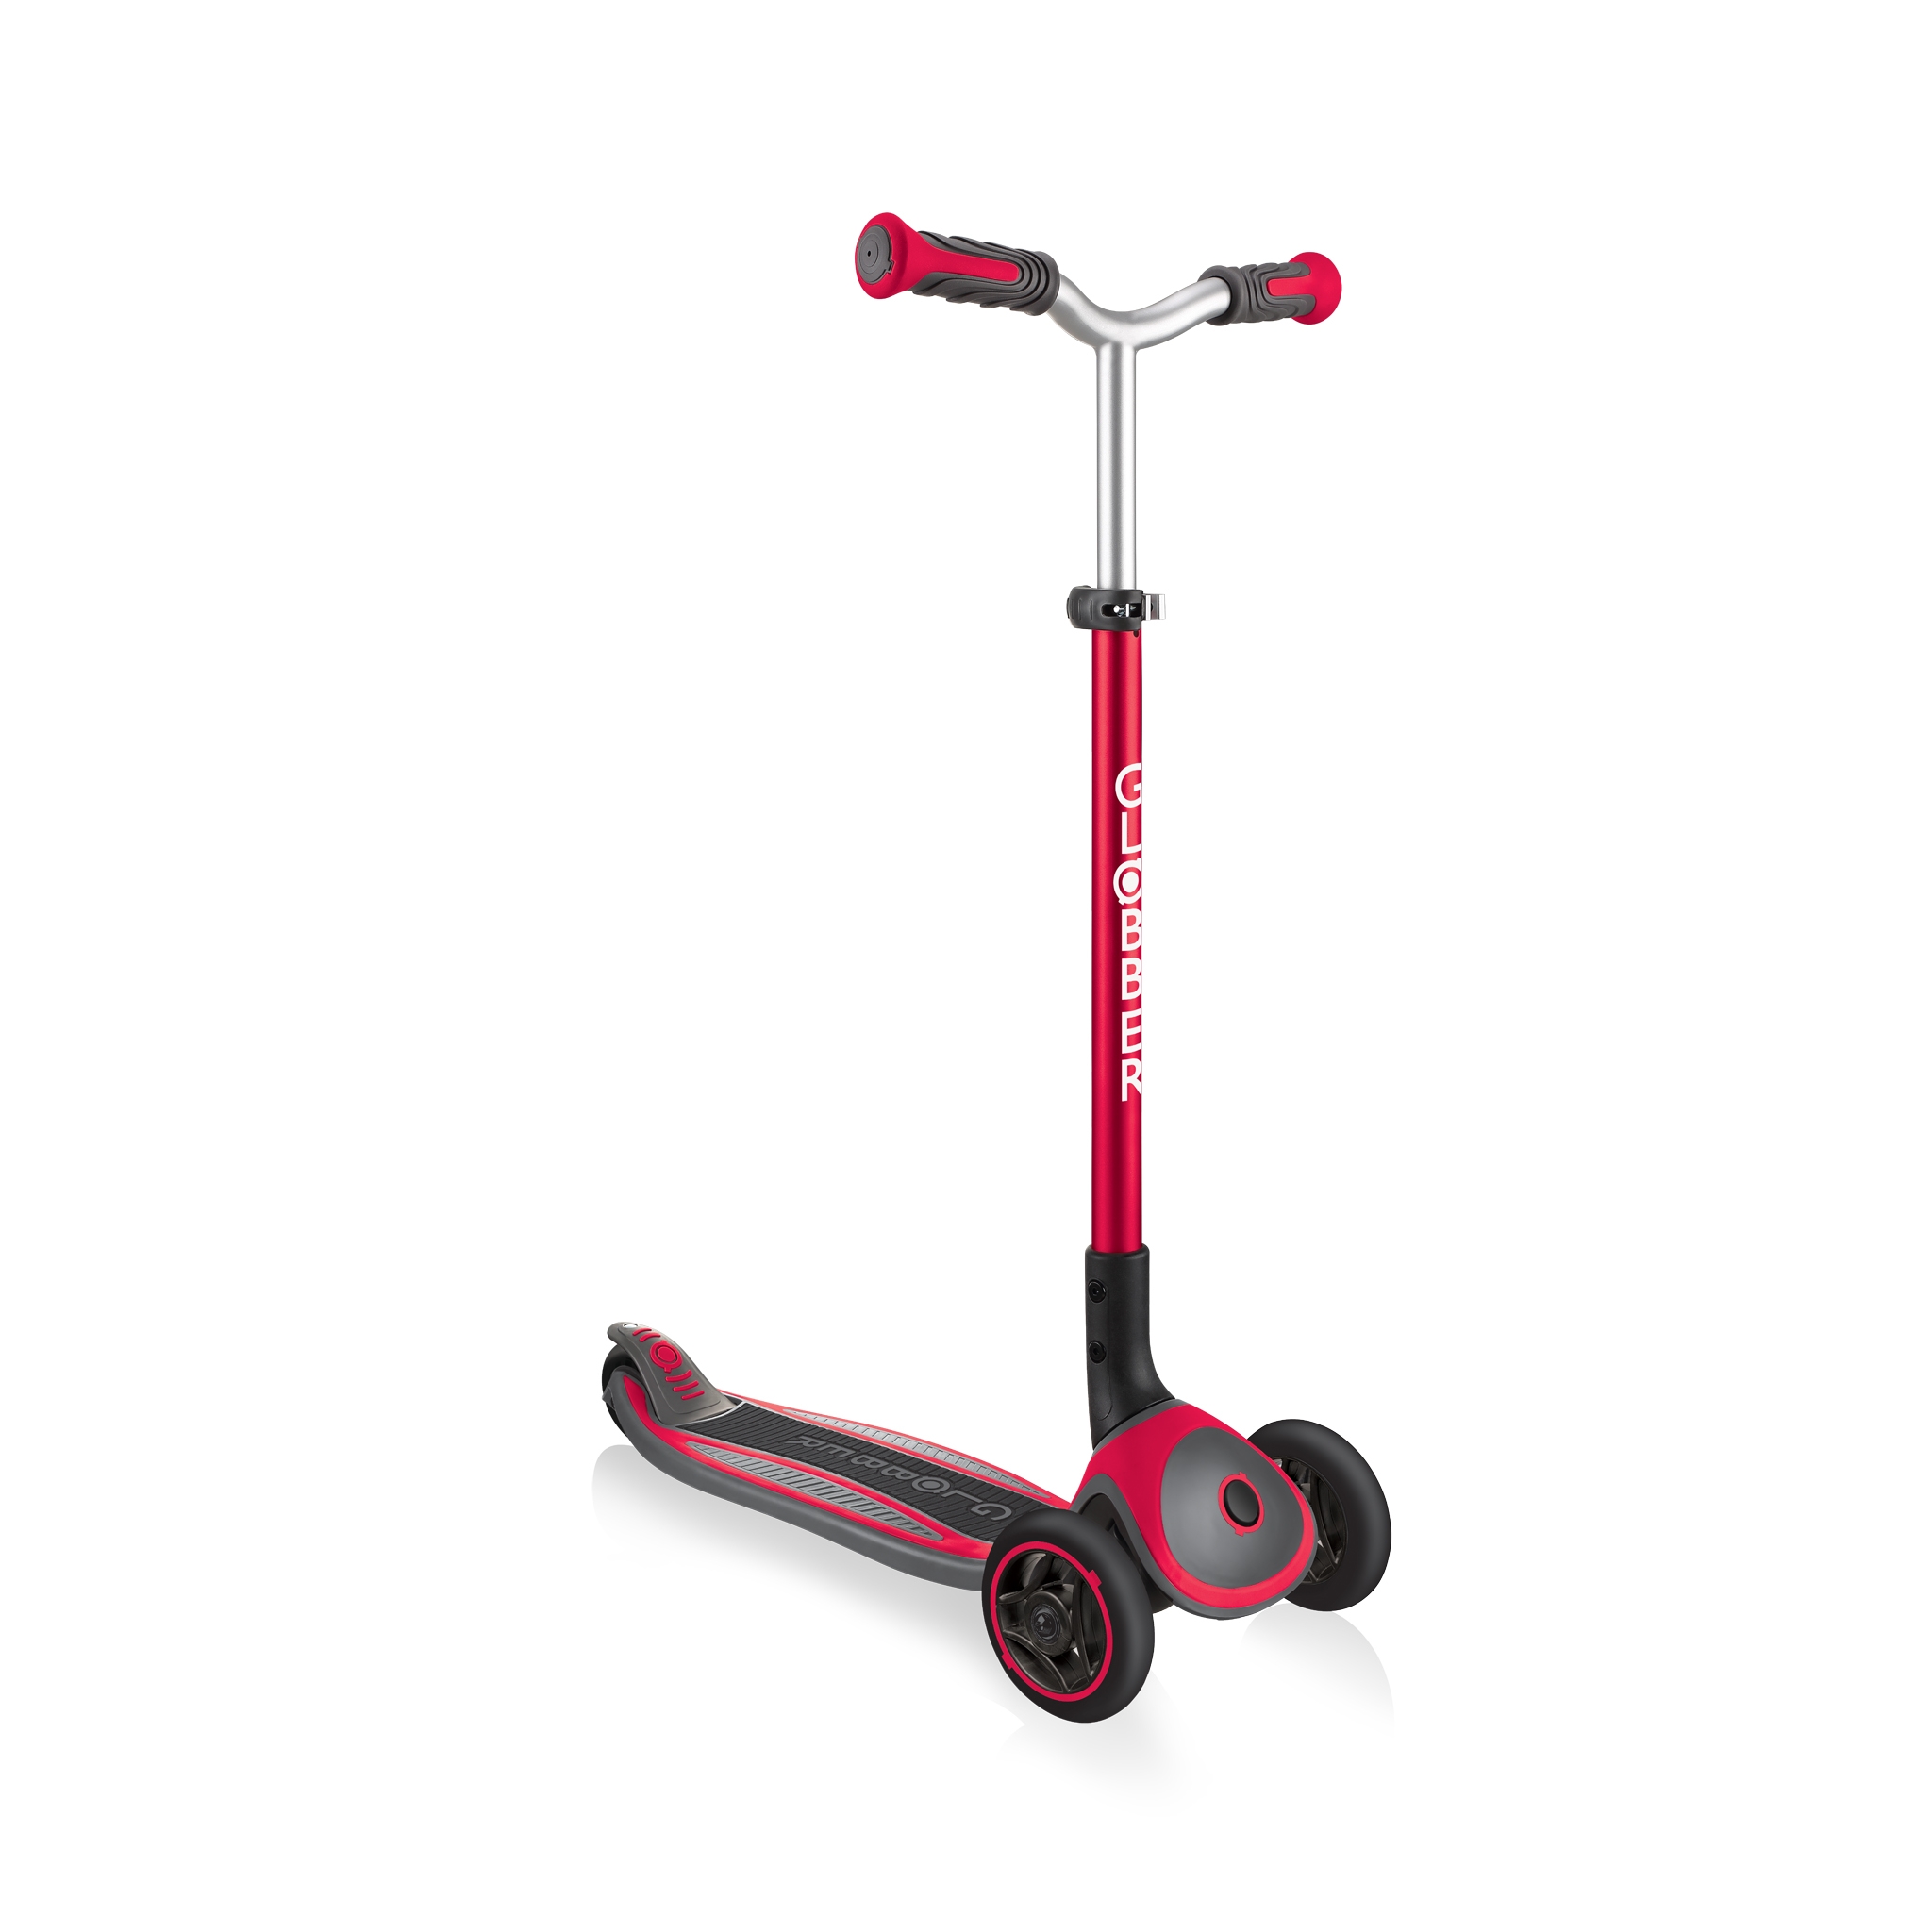 Globber-MASTER-premium-3-wheel-foldable-scooters-for-kids-aged-4-to-14_black-red 1